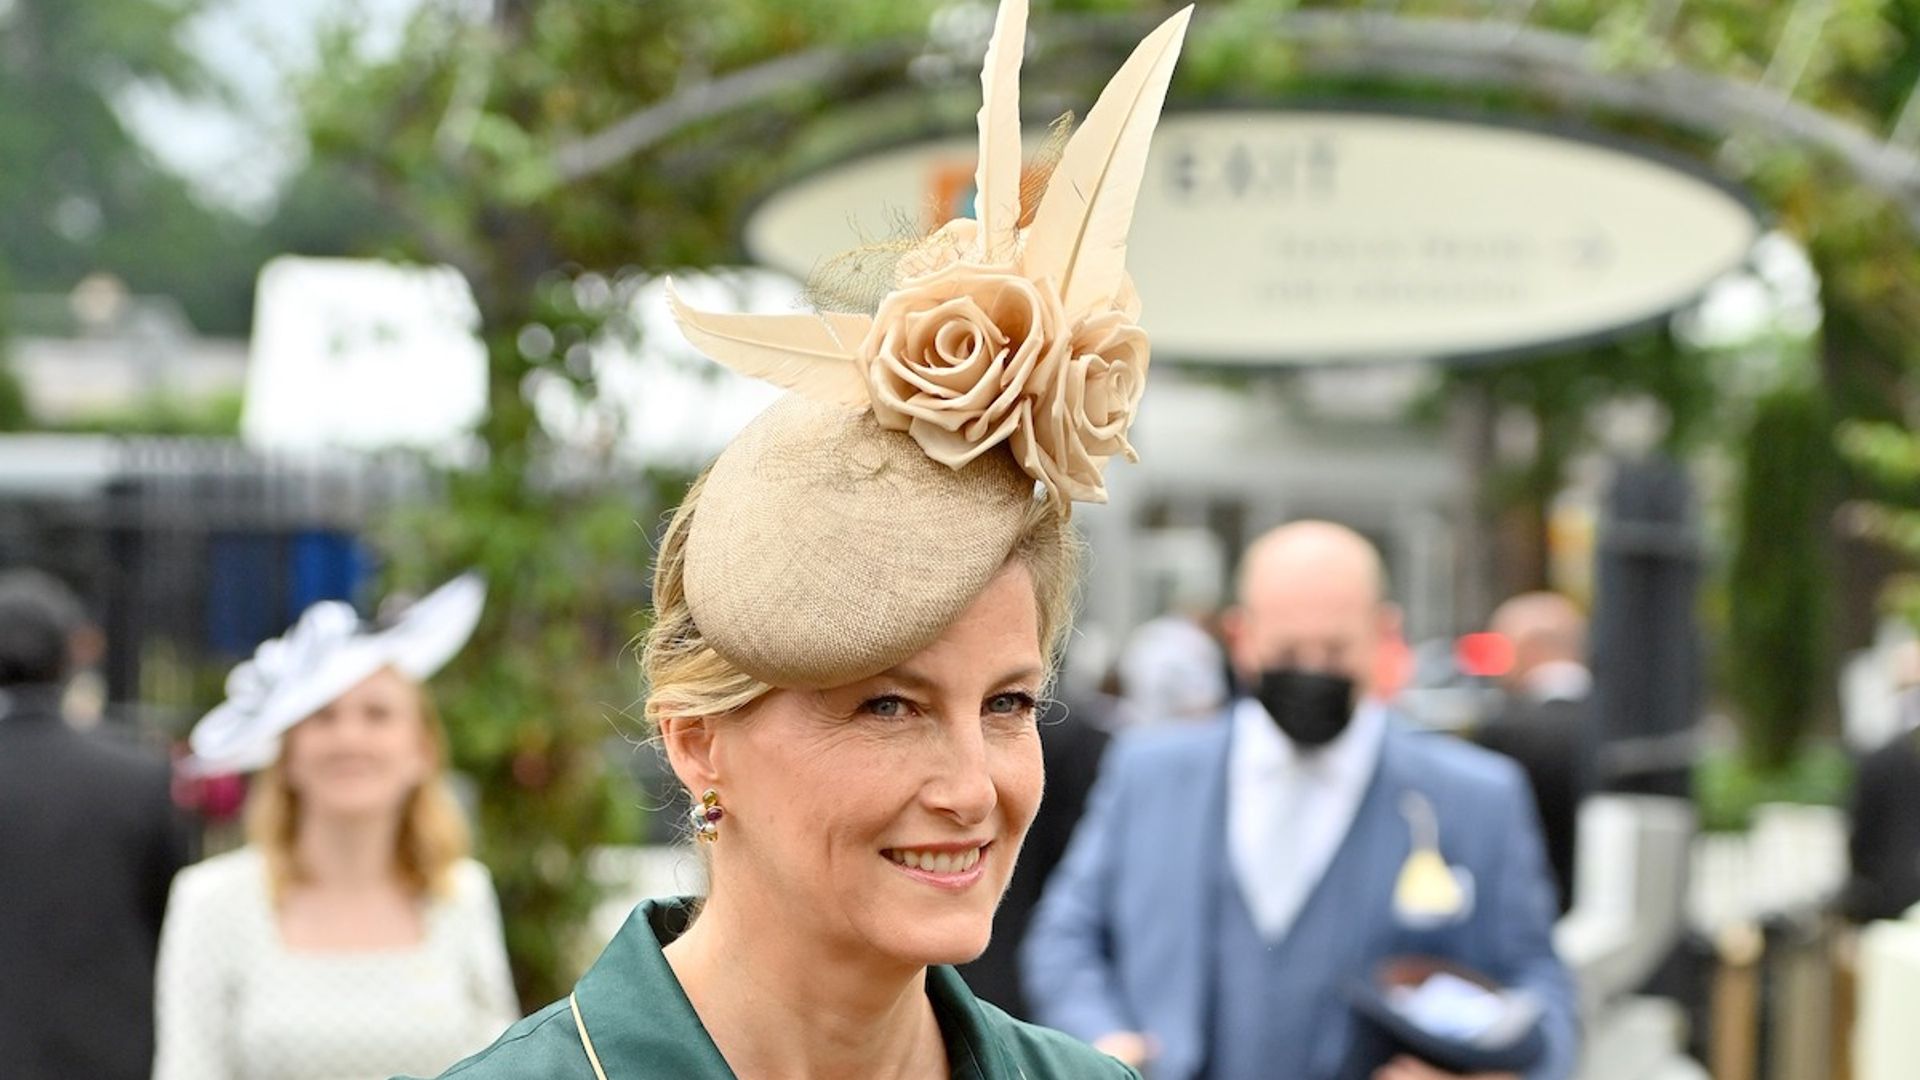 Countess Sophie surprises with royal wedding headpiece at Royal Ascot Ladies' Day